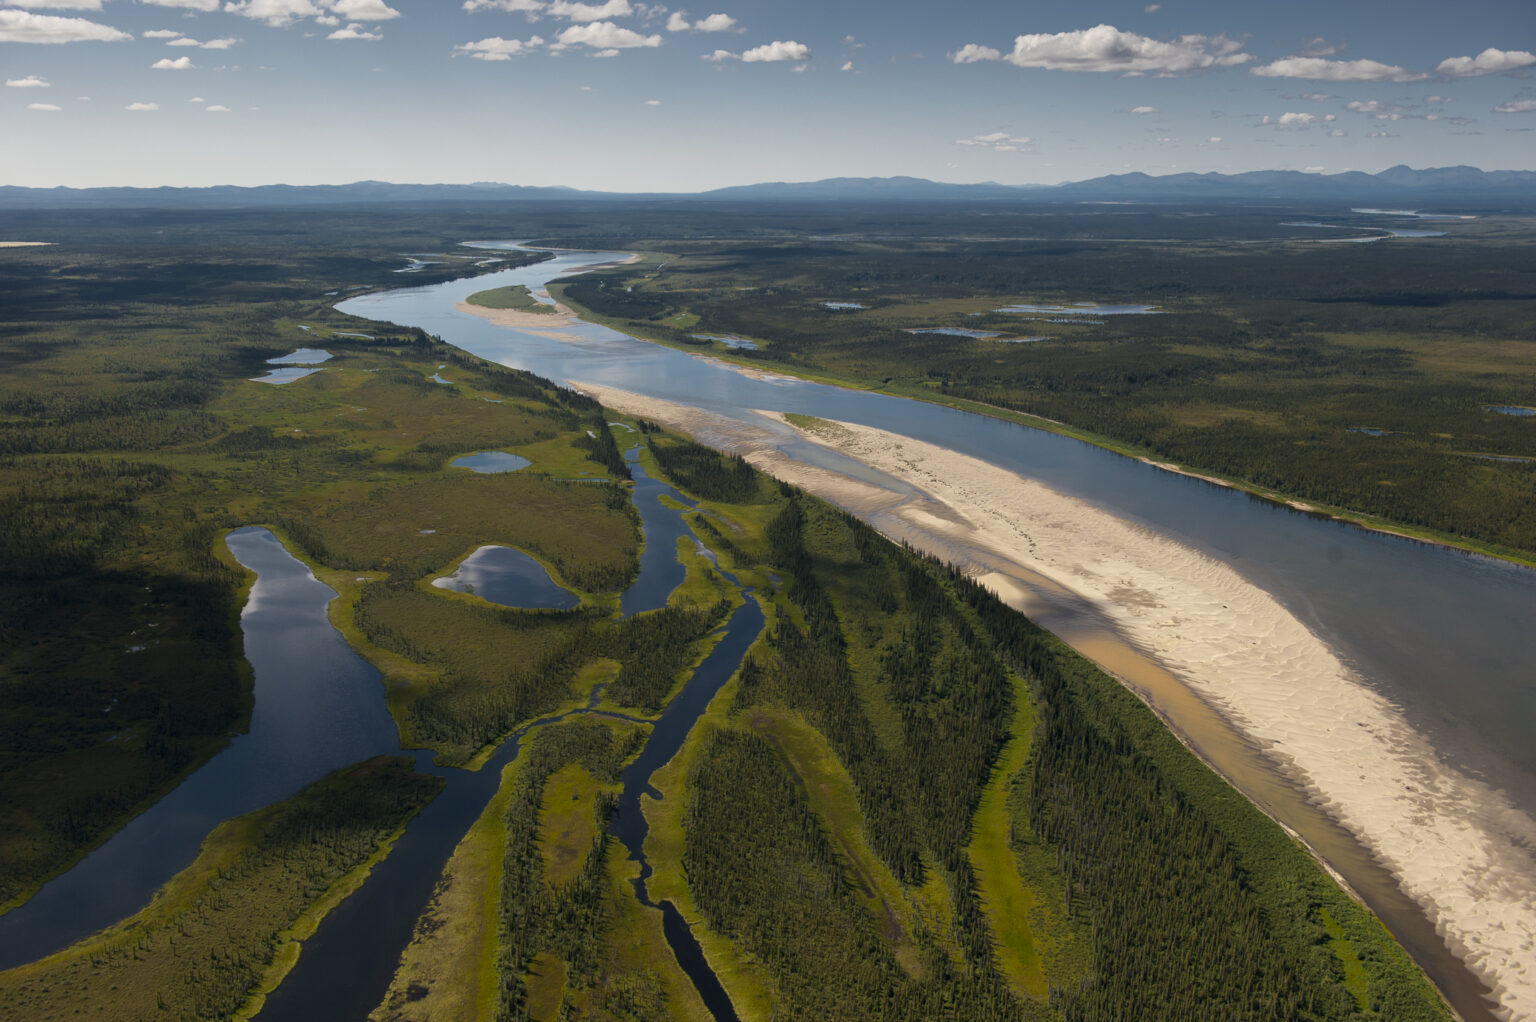 The Kobuk River is seen on July 22, 2012. (Photo by Neal Herbert/National Park Service